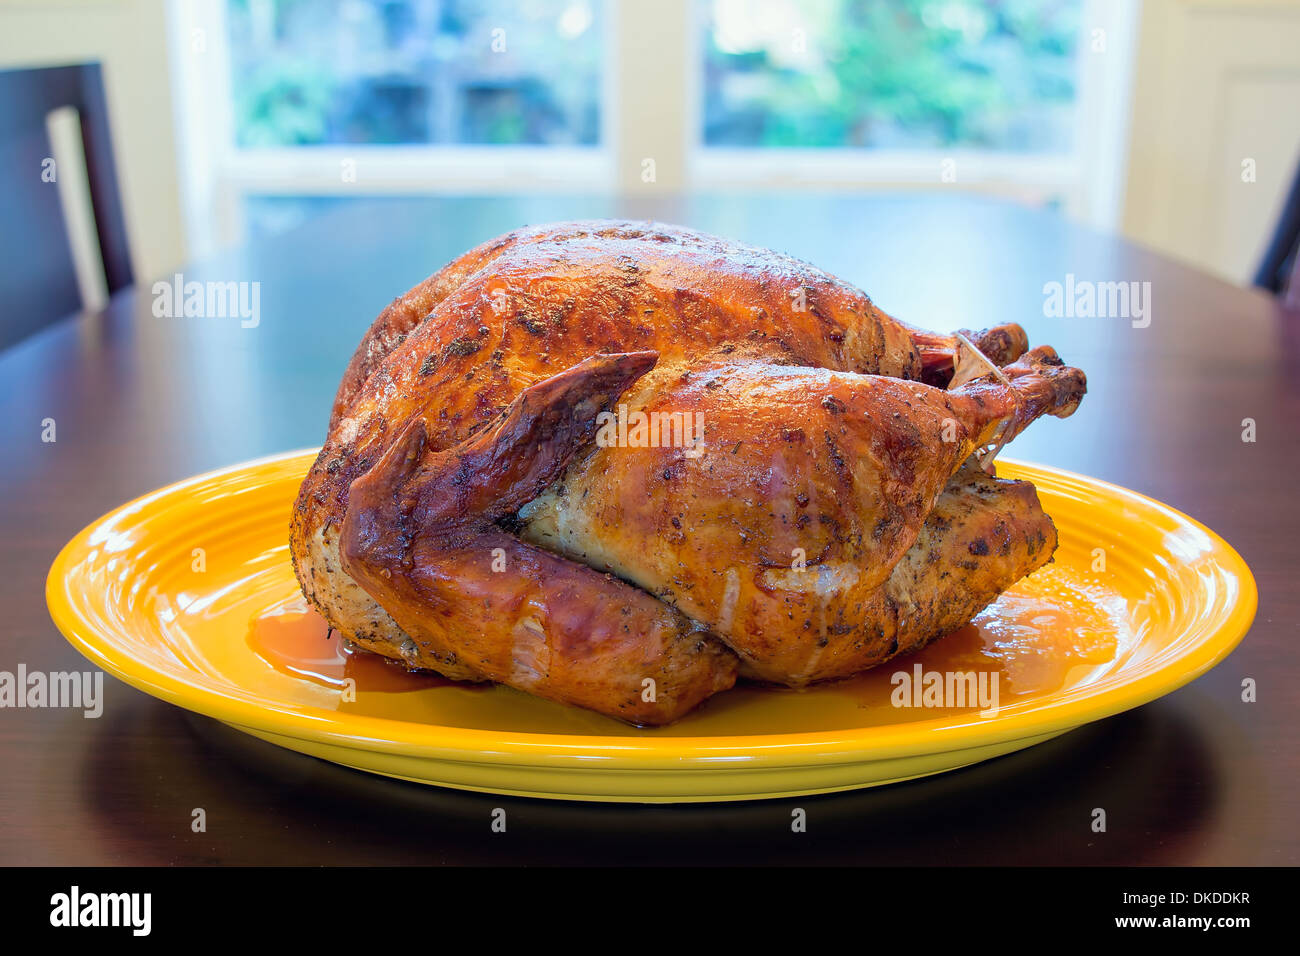 Cooked Whole Roast Turkey on Yellow Platter Sitting on Table for Thanksgiving Dinner Stock Photo